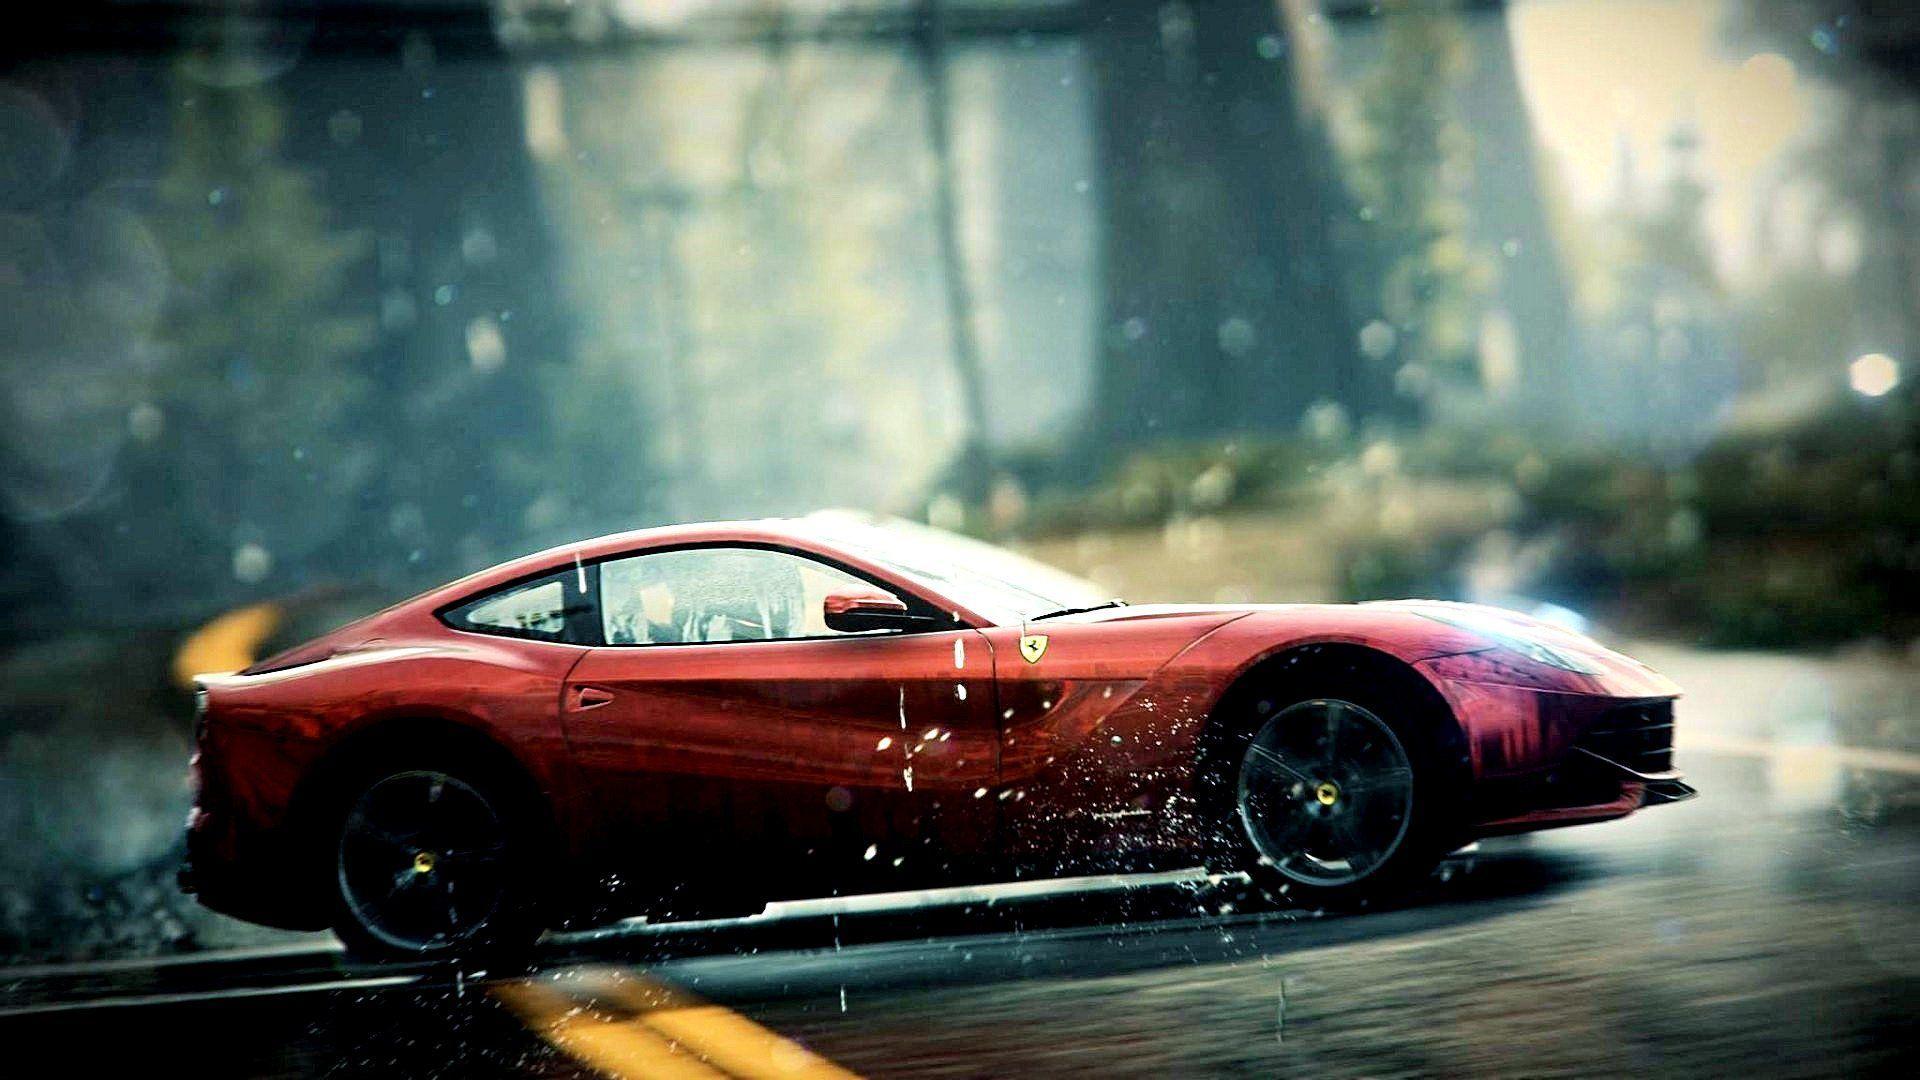 Need for Speed: Rivals [13] wallpaper - Game wallpapers - #28204